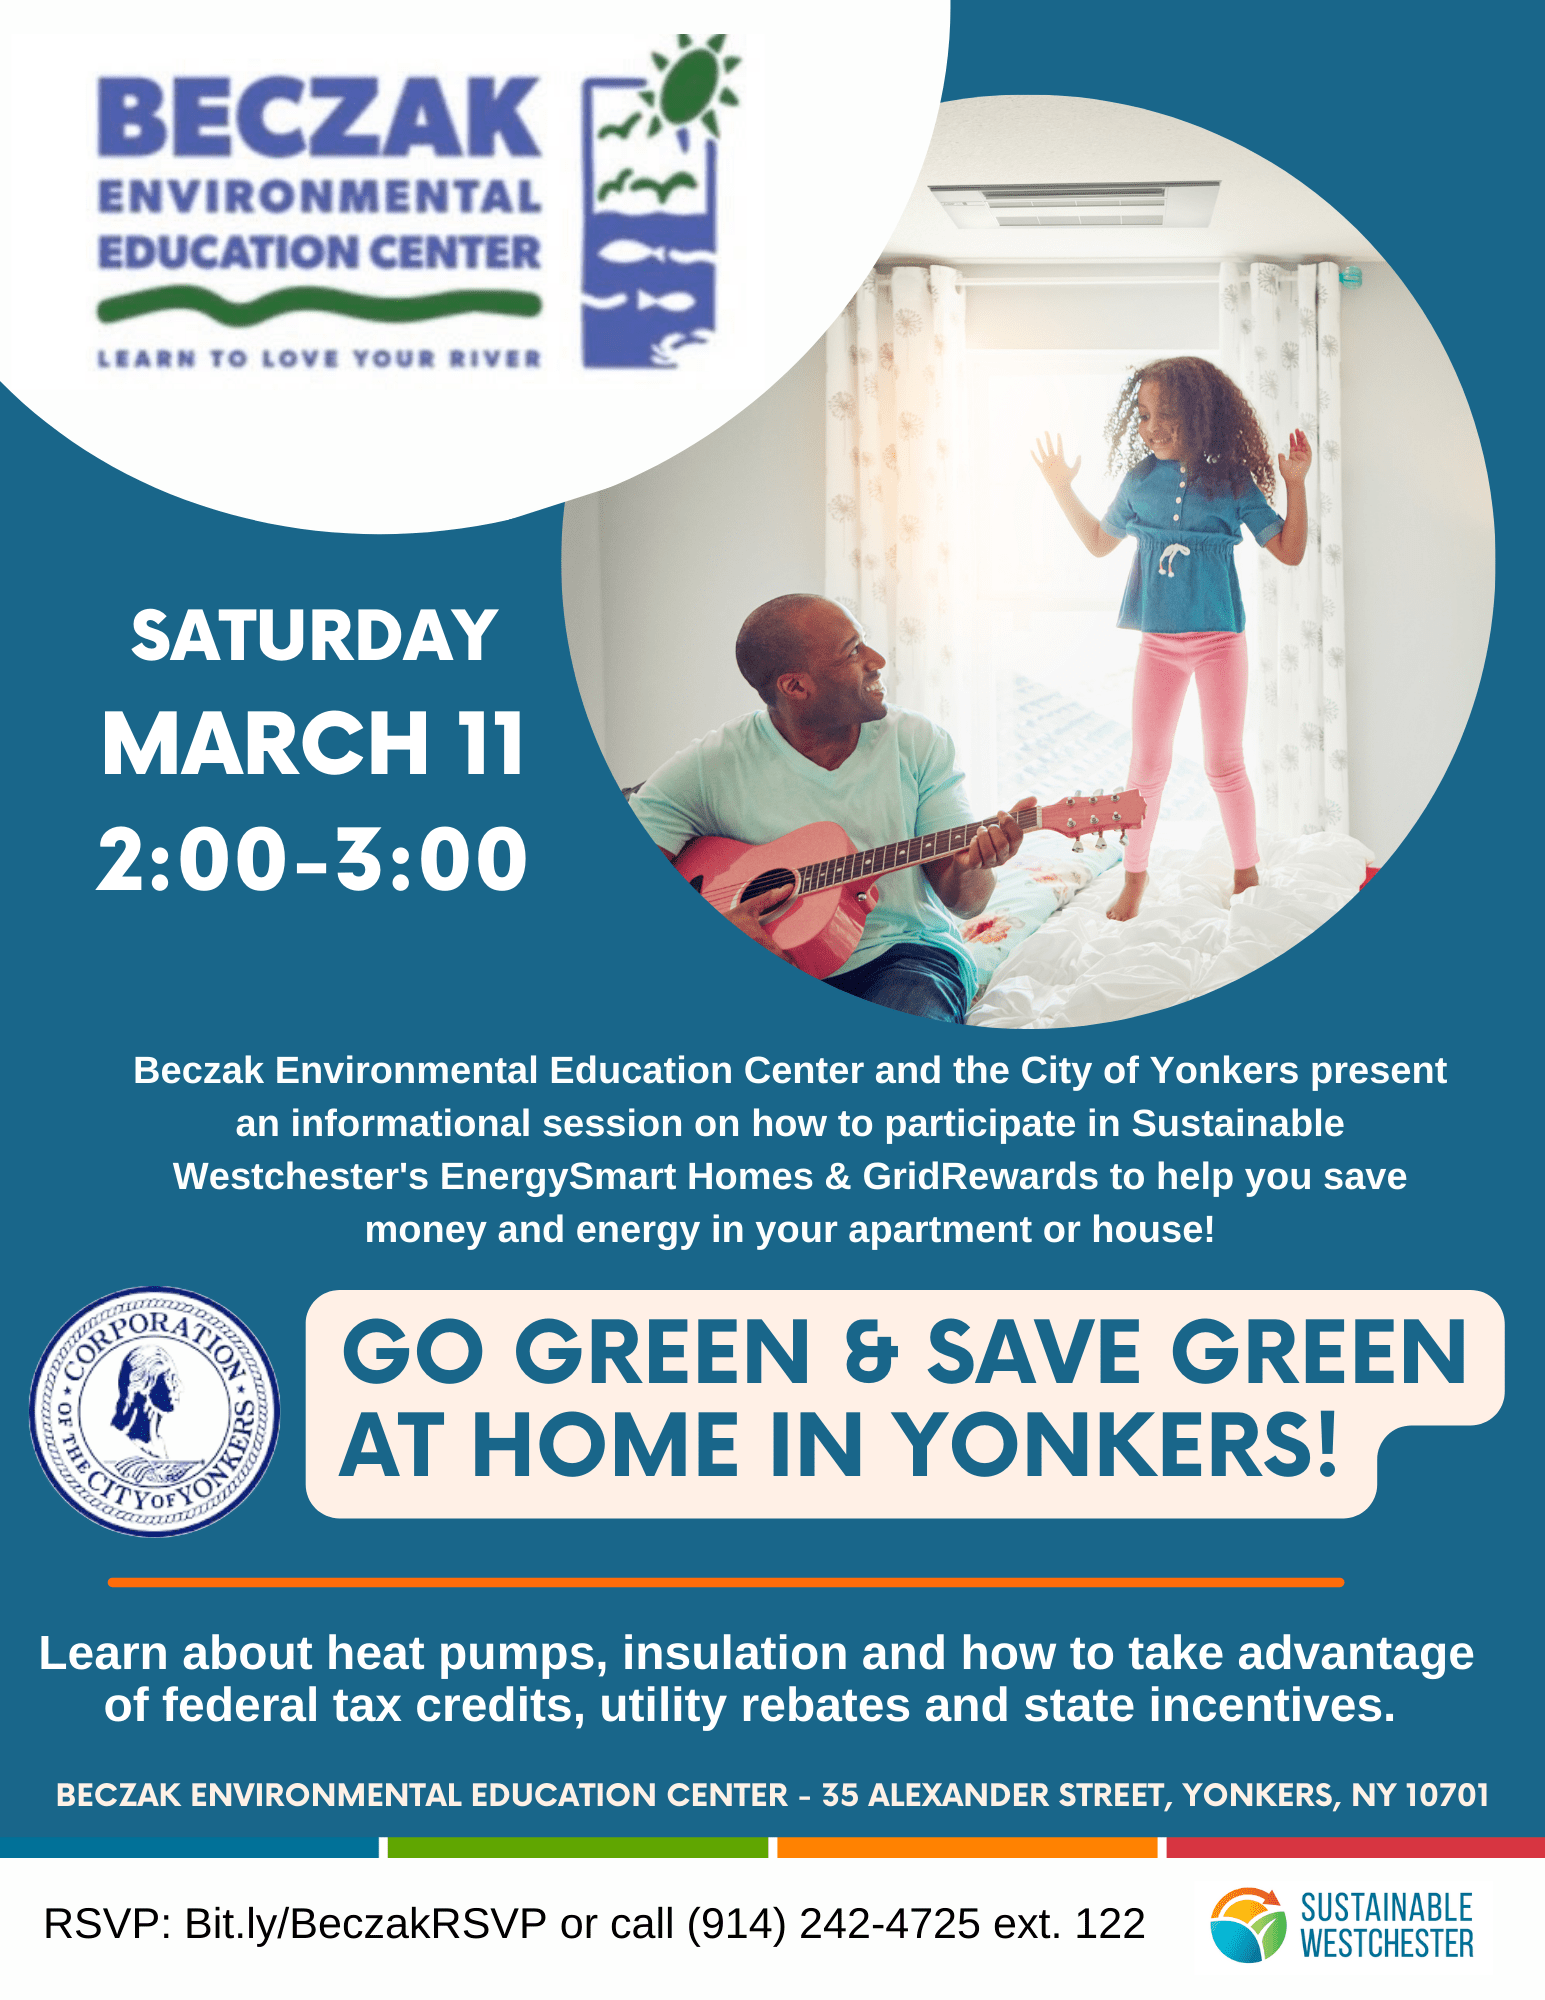 Go Green & Save Green at Home in Yonkers! – Saturday, March 11, 2023 from 2:00-3:00pm